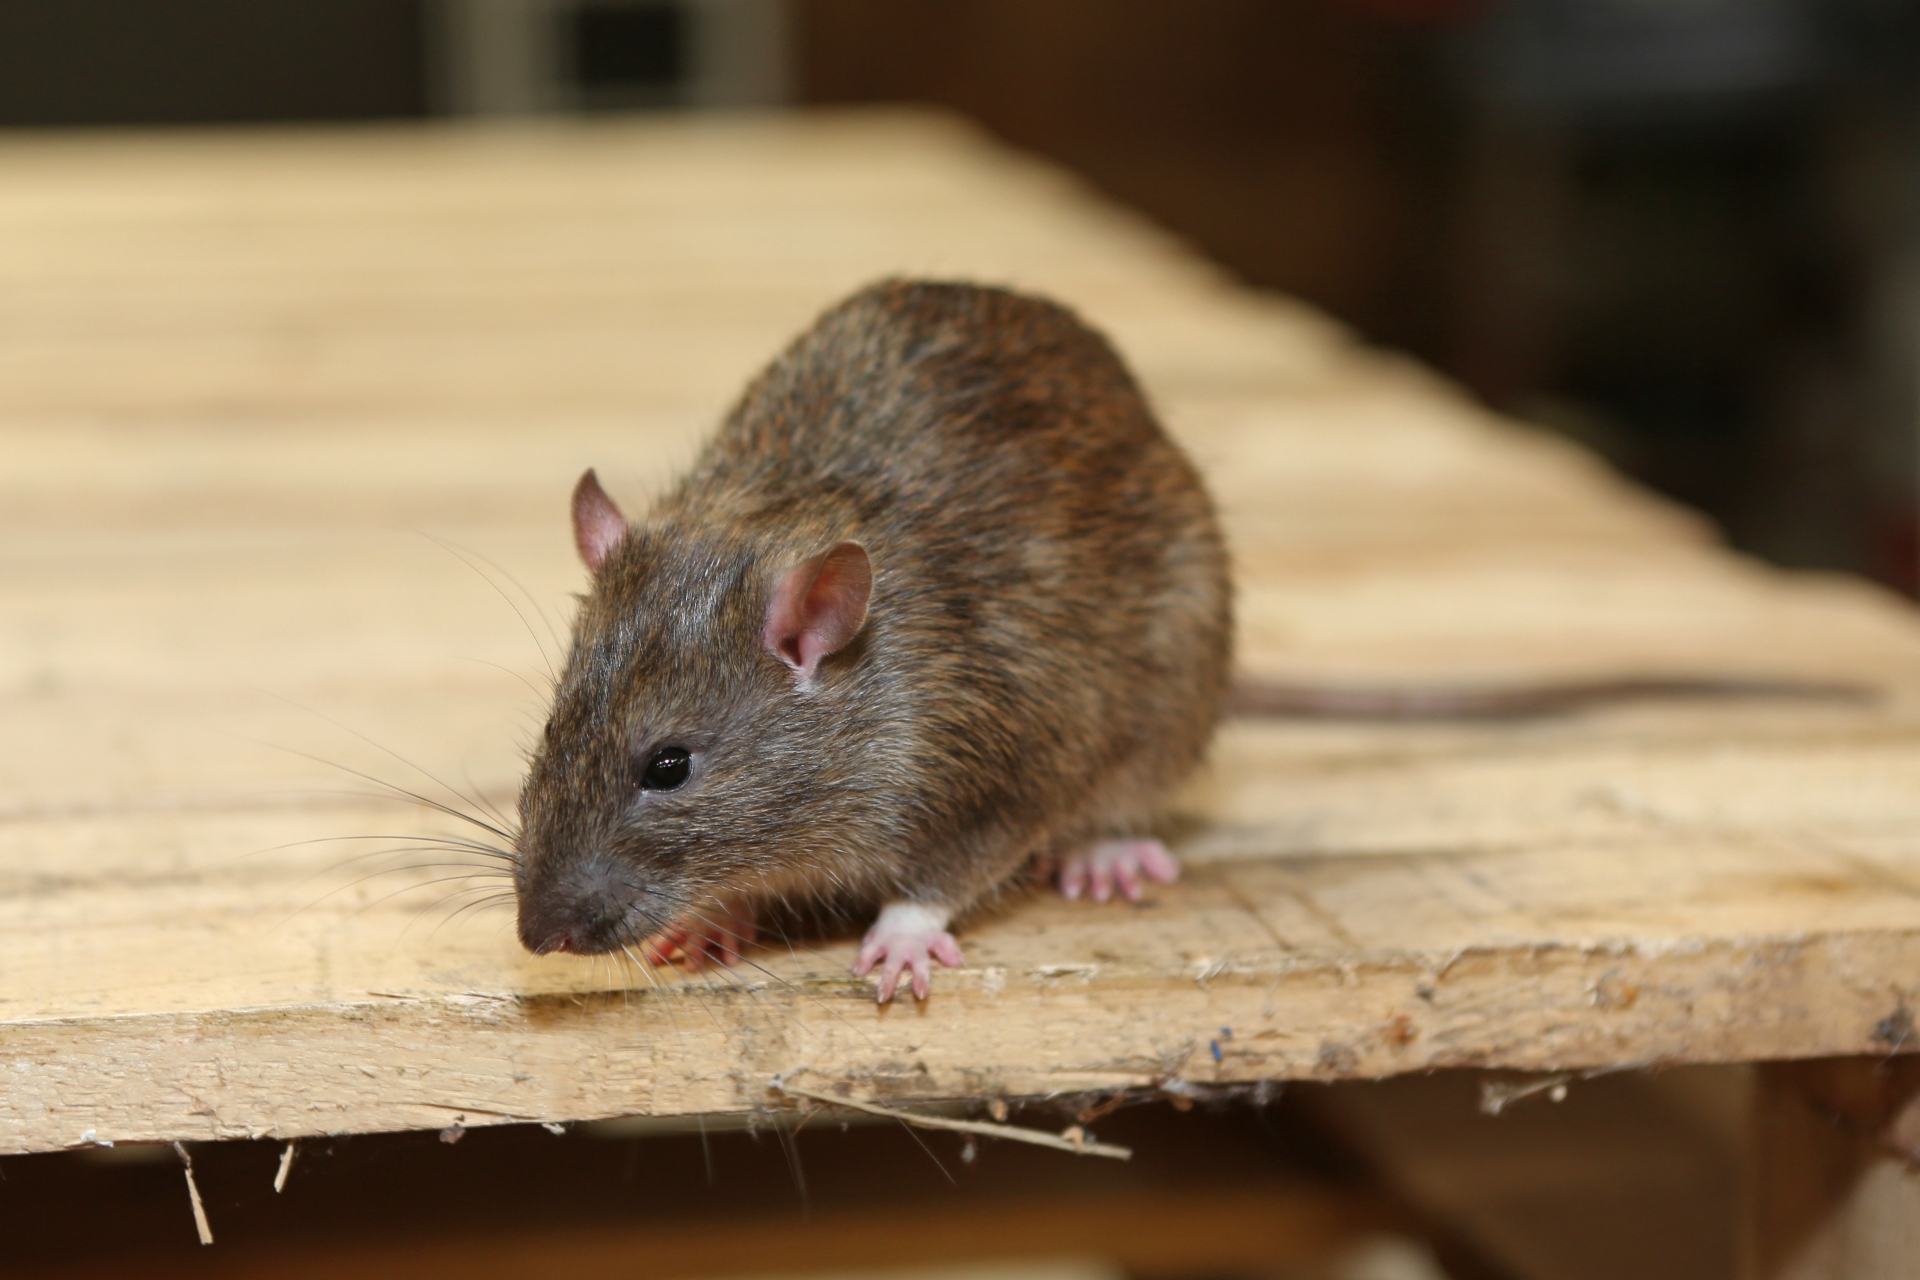 Rat Infestation, Pest Control in Bayswater, W2. Call Now 020 8166 9746